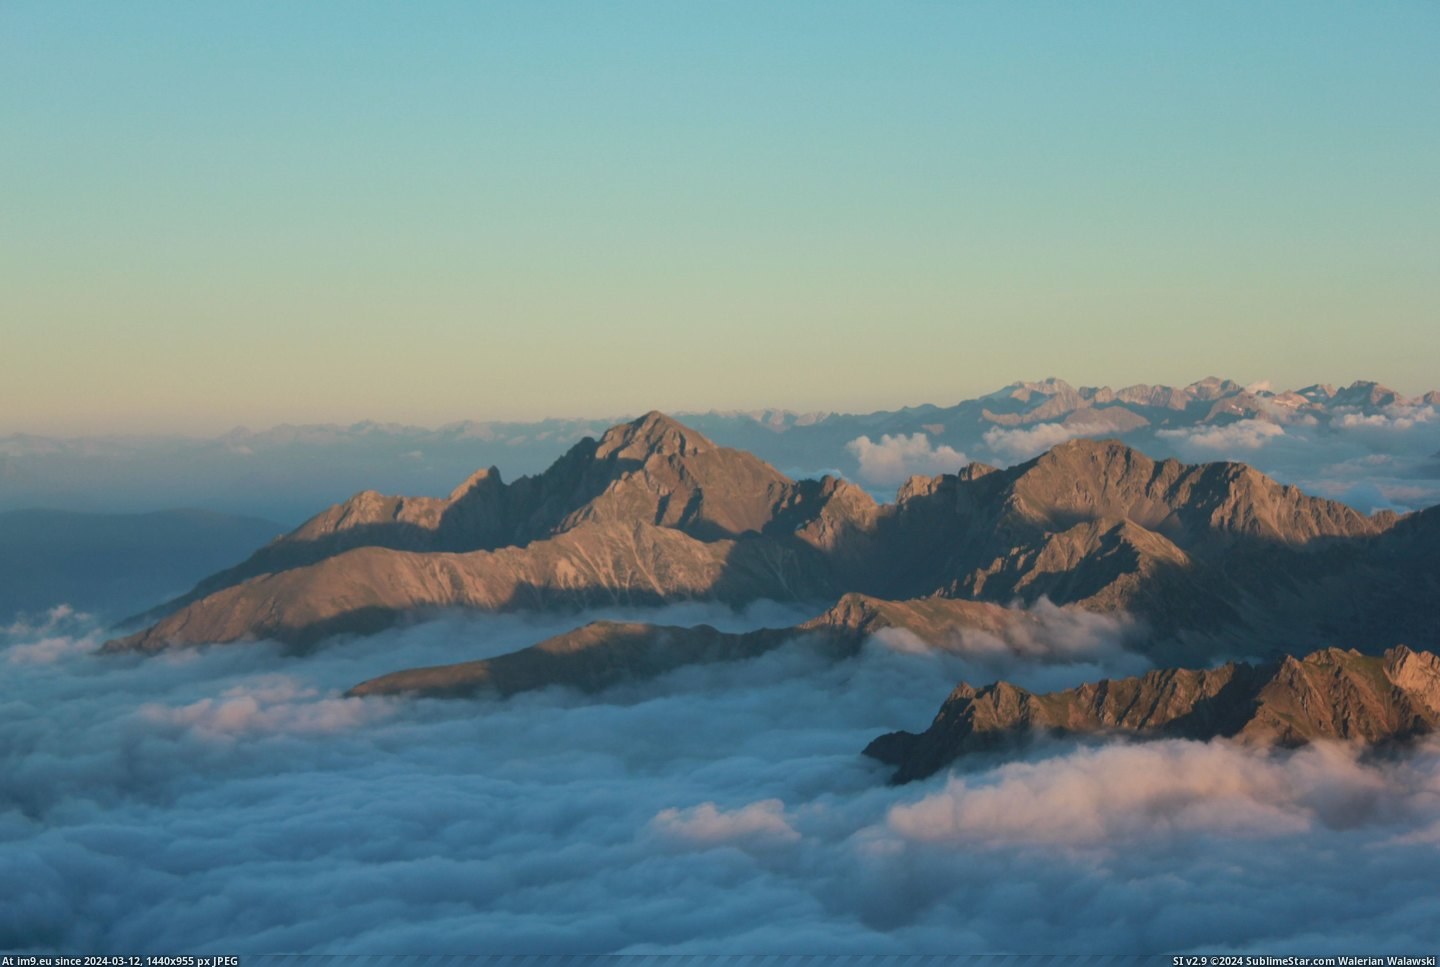 #Sea #Late #France #Central #Midi #Pyrenees #Bigorre #Afternoon #Clouds #East [Earthporn] Late afternoon above the sea of clouds: looking east over the central Pyrenees, Pic du Midi de Bigorre, France [3456 Pic. (Изображение из альбом My r/EARTHPORN favs))